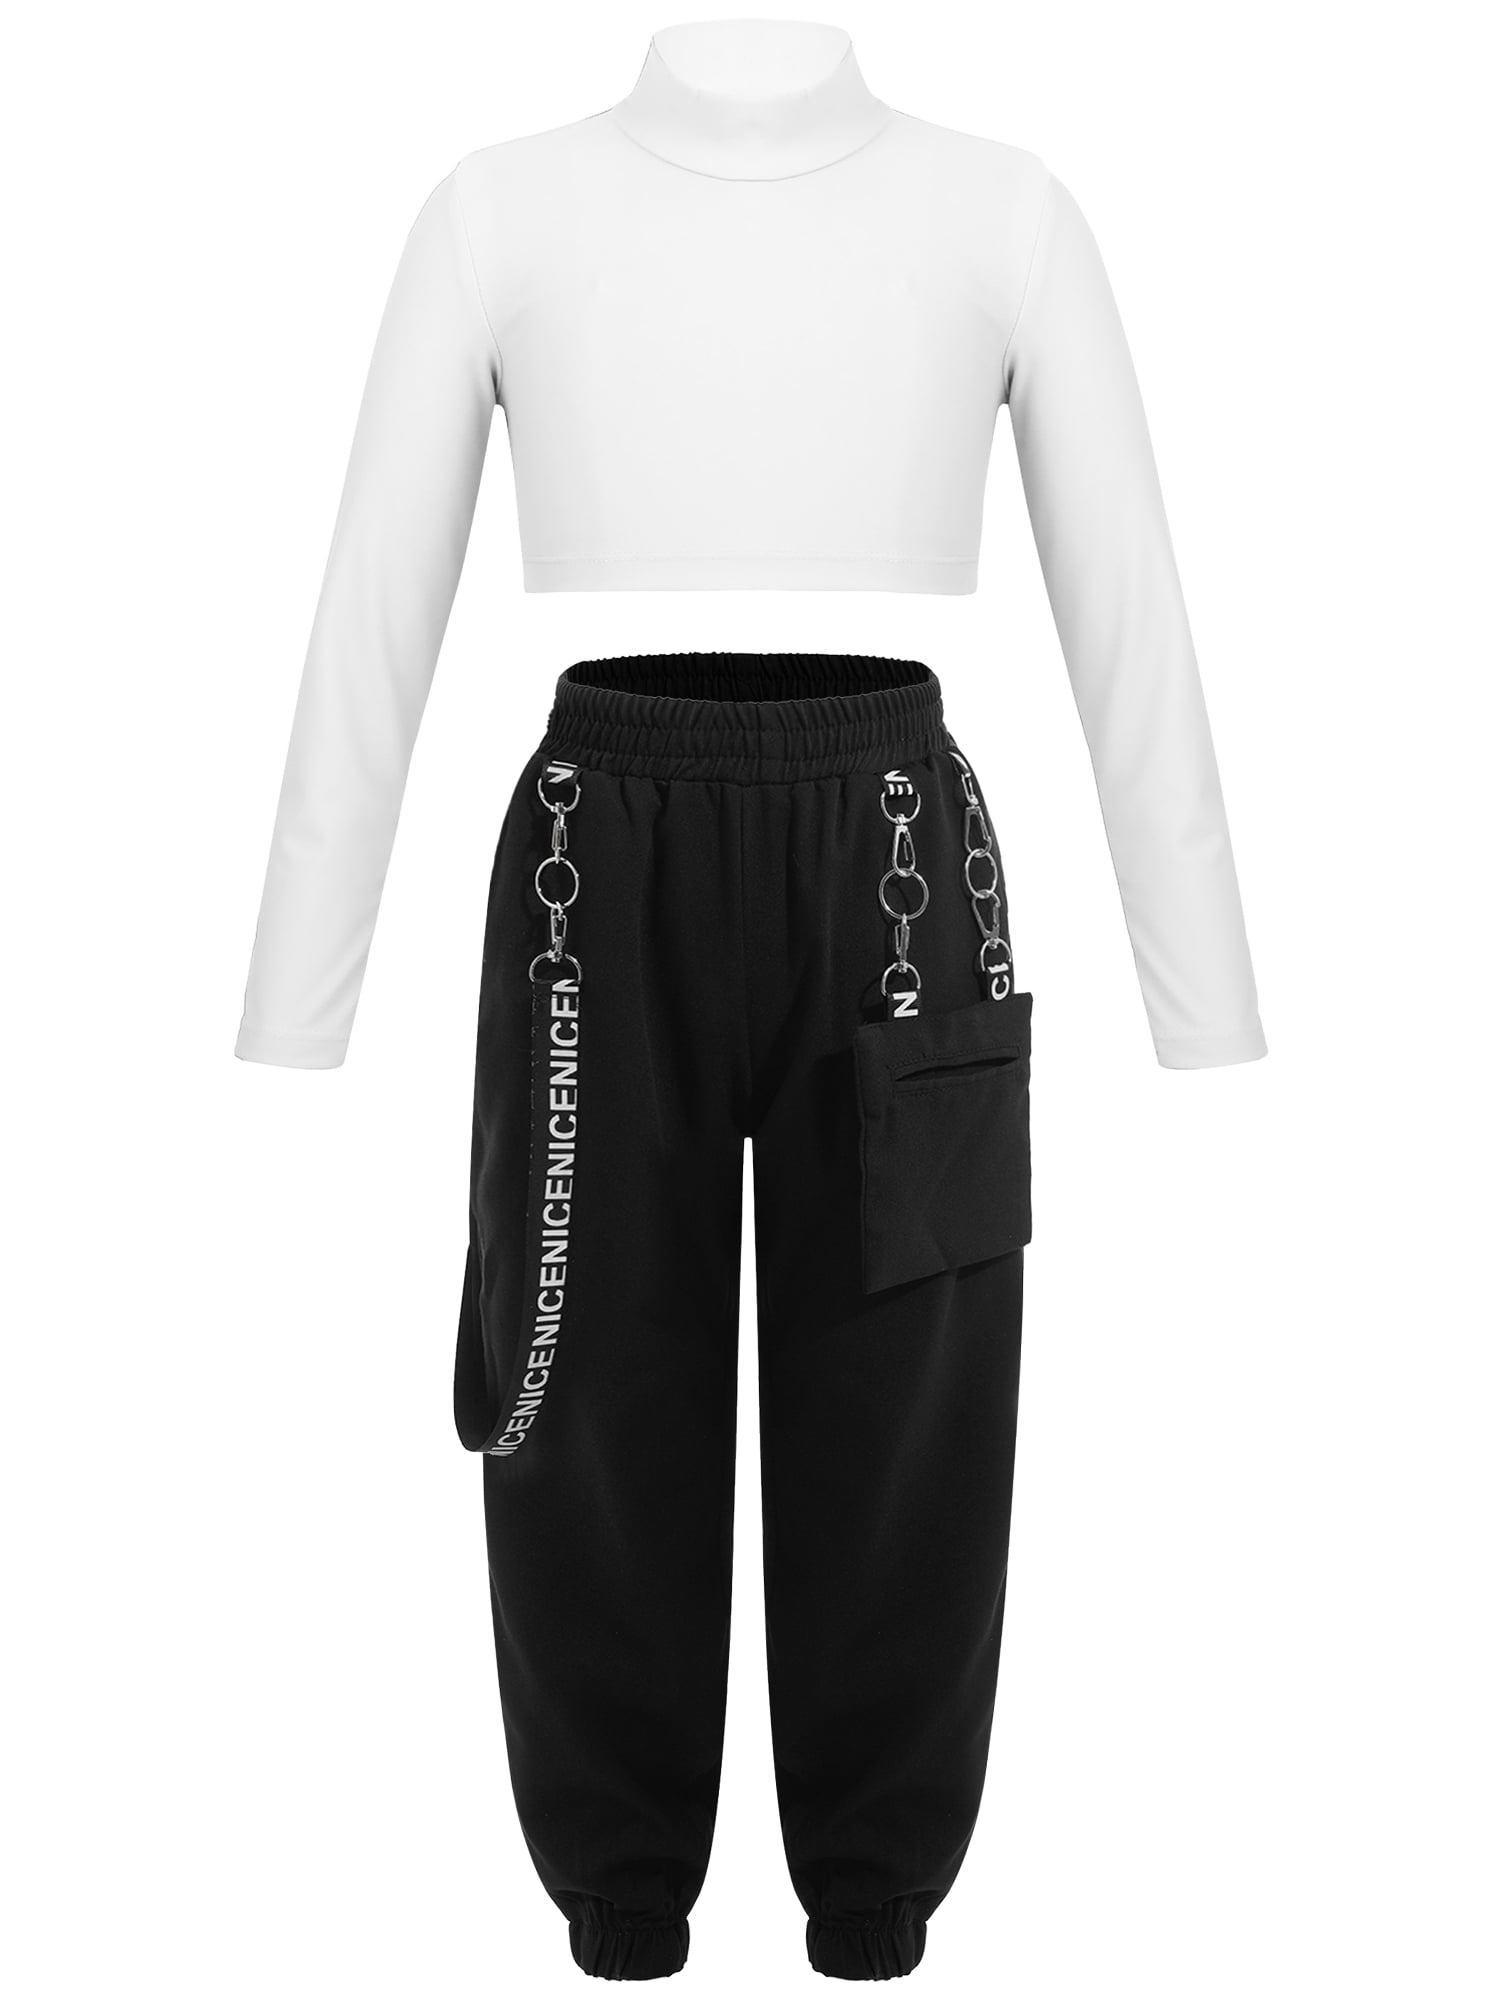 YIZYIF Girls Solid Color Long Sleeve Cropped T-Shirt with Sweatpants Dance  Suit Outfit Hip Hop Dance Costume 